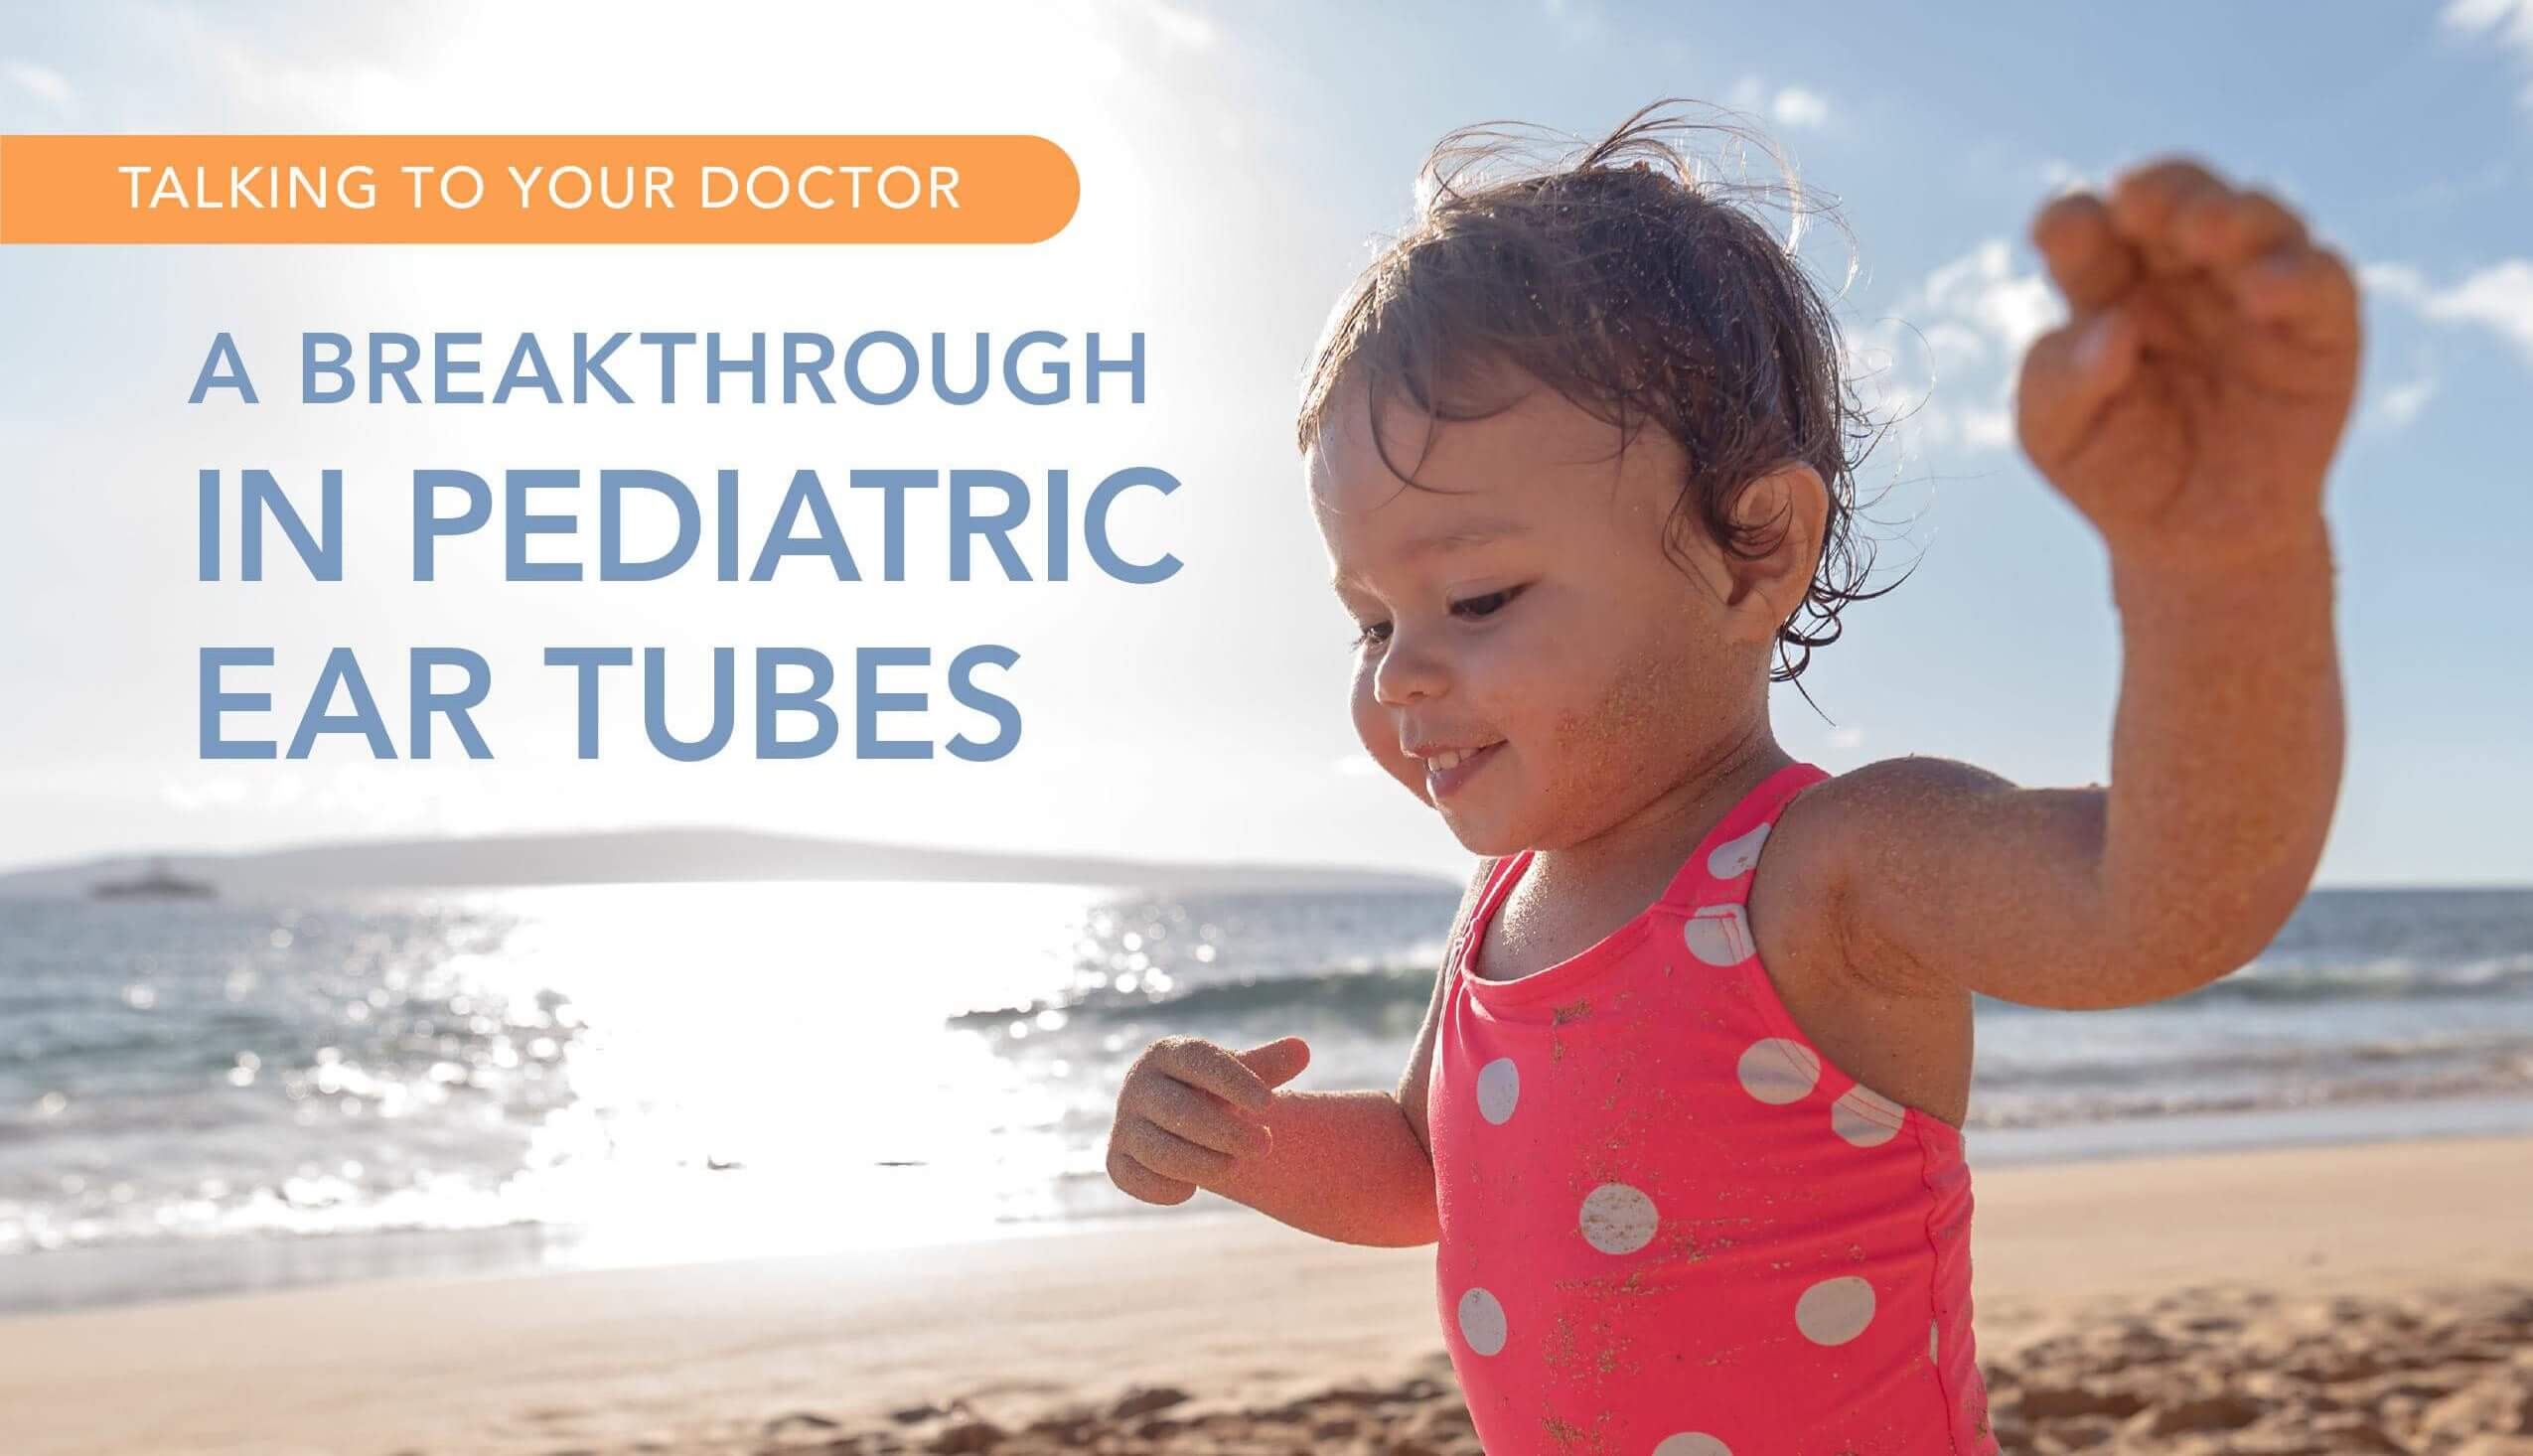 brochure cover titled "Talking to your Doctor: A Breakthrough in Pediatric Ear Tubes"